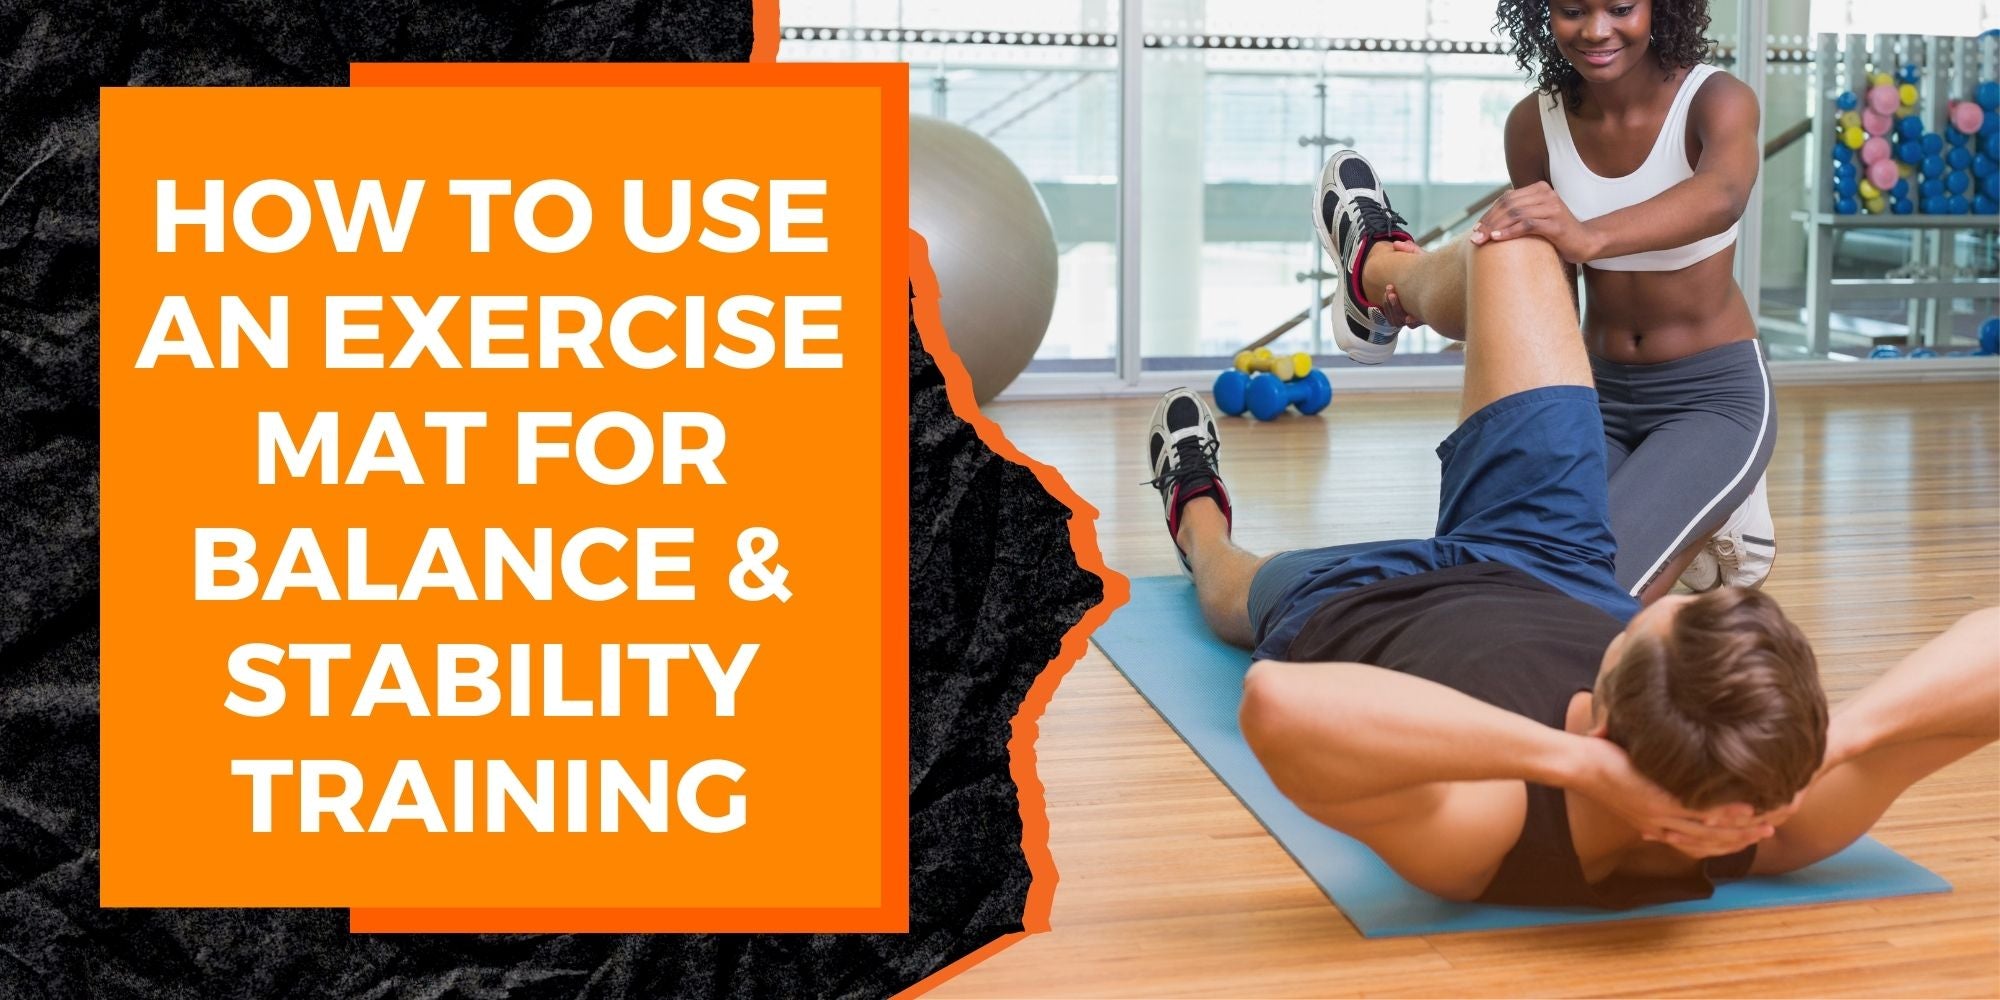 How to Use an Exercise Mat for Balance and Stability Training